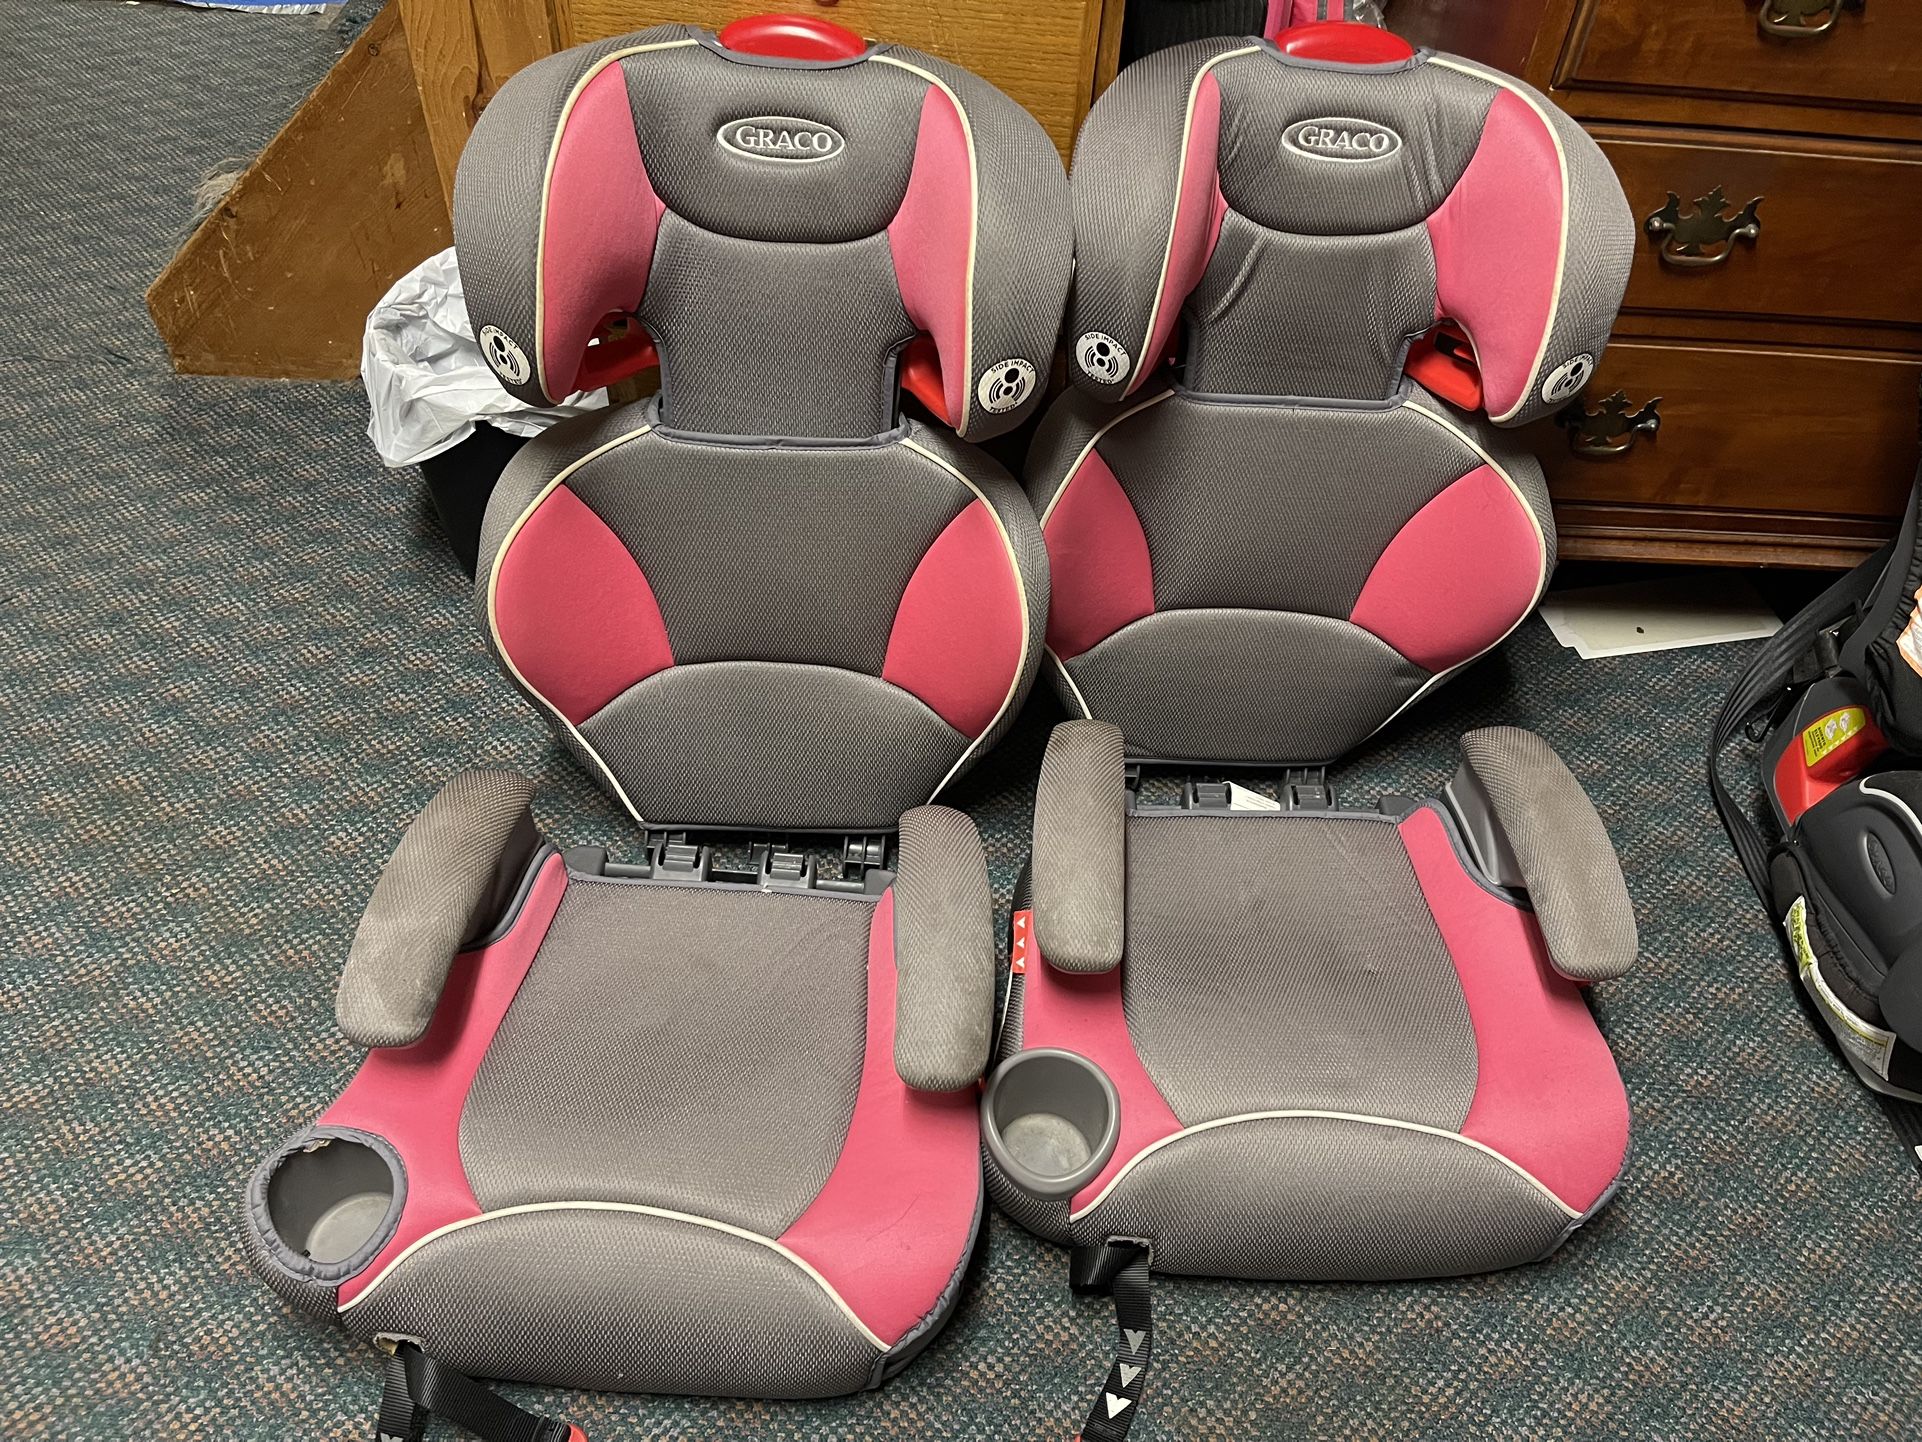 Graco Car seat Booster Seat $40 Each Or $70 For Both